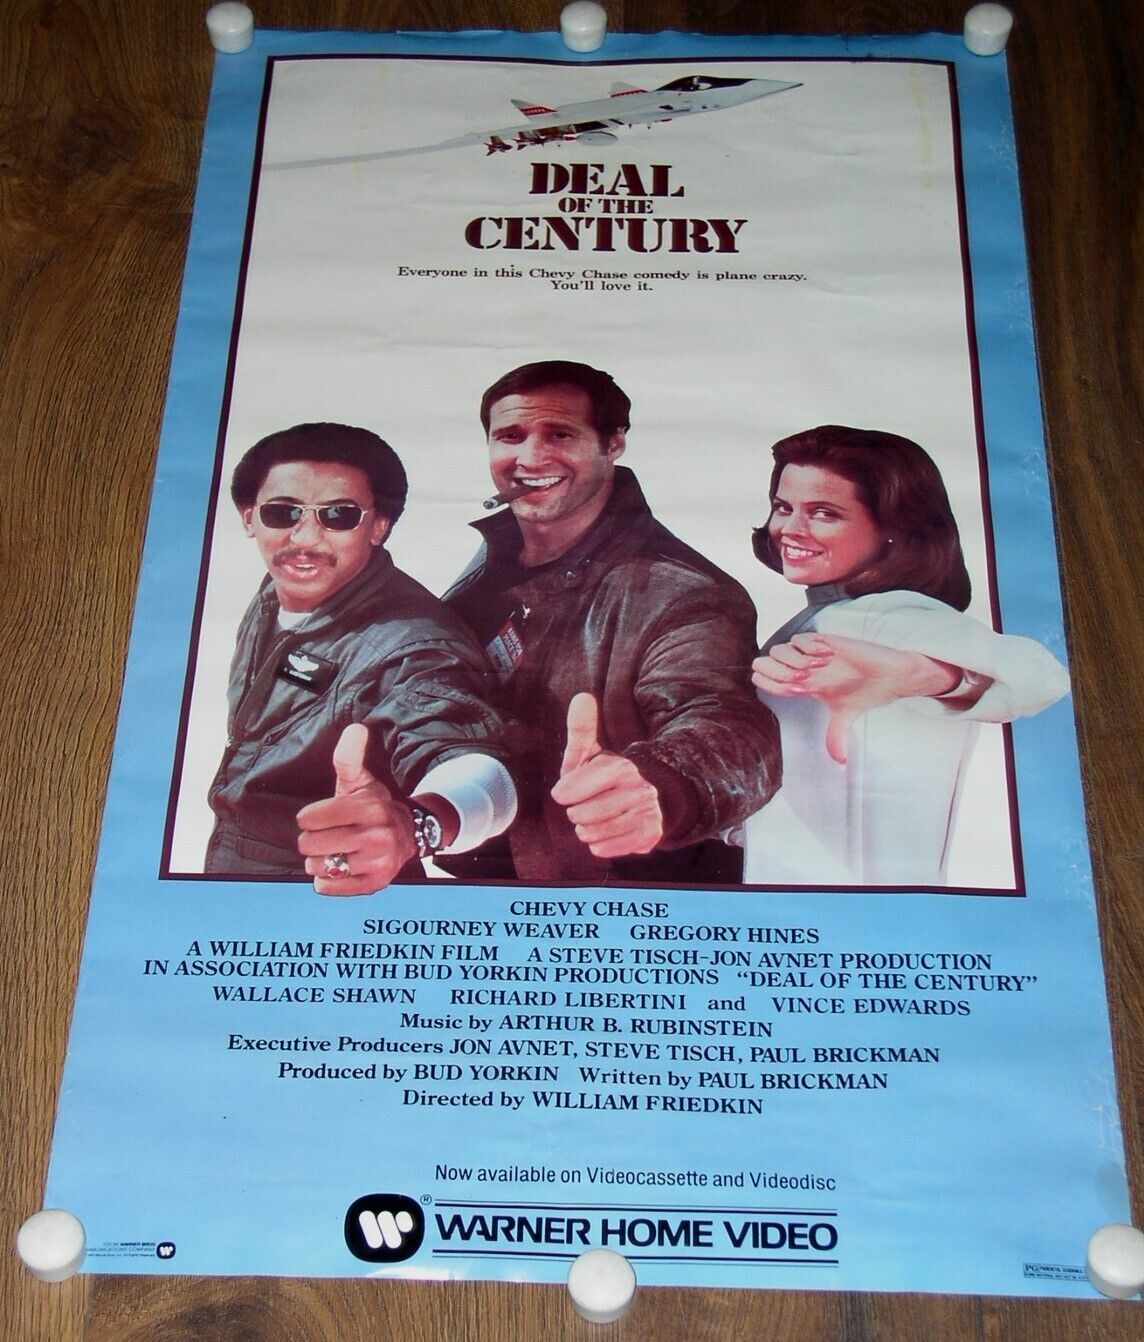 Primary image for DEAL OF THE CENTURY PROMO VIDEO POSTER VINTAGE 1983 CHEVY CHASE GREGORY HINES